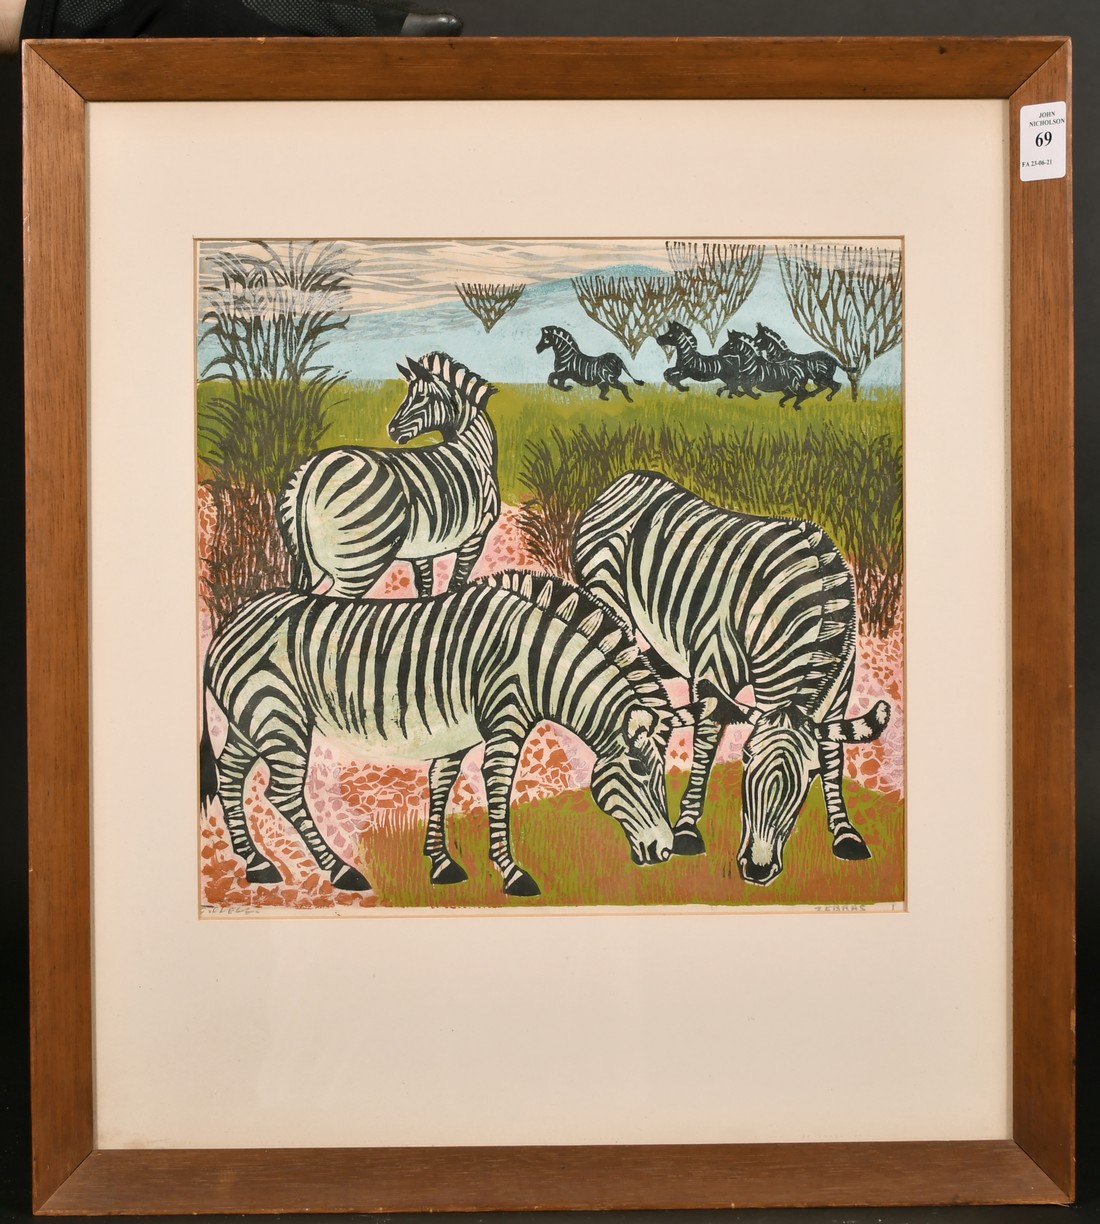 Christine Clegg, 'Zebras', colour linocut, signed in pencil, 11.5" x 10.5". - Image 2 of 4